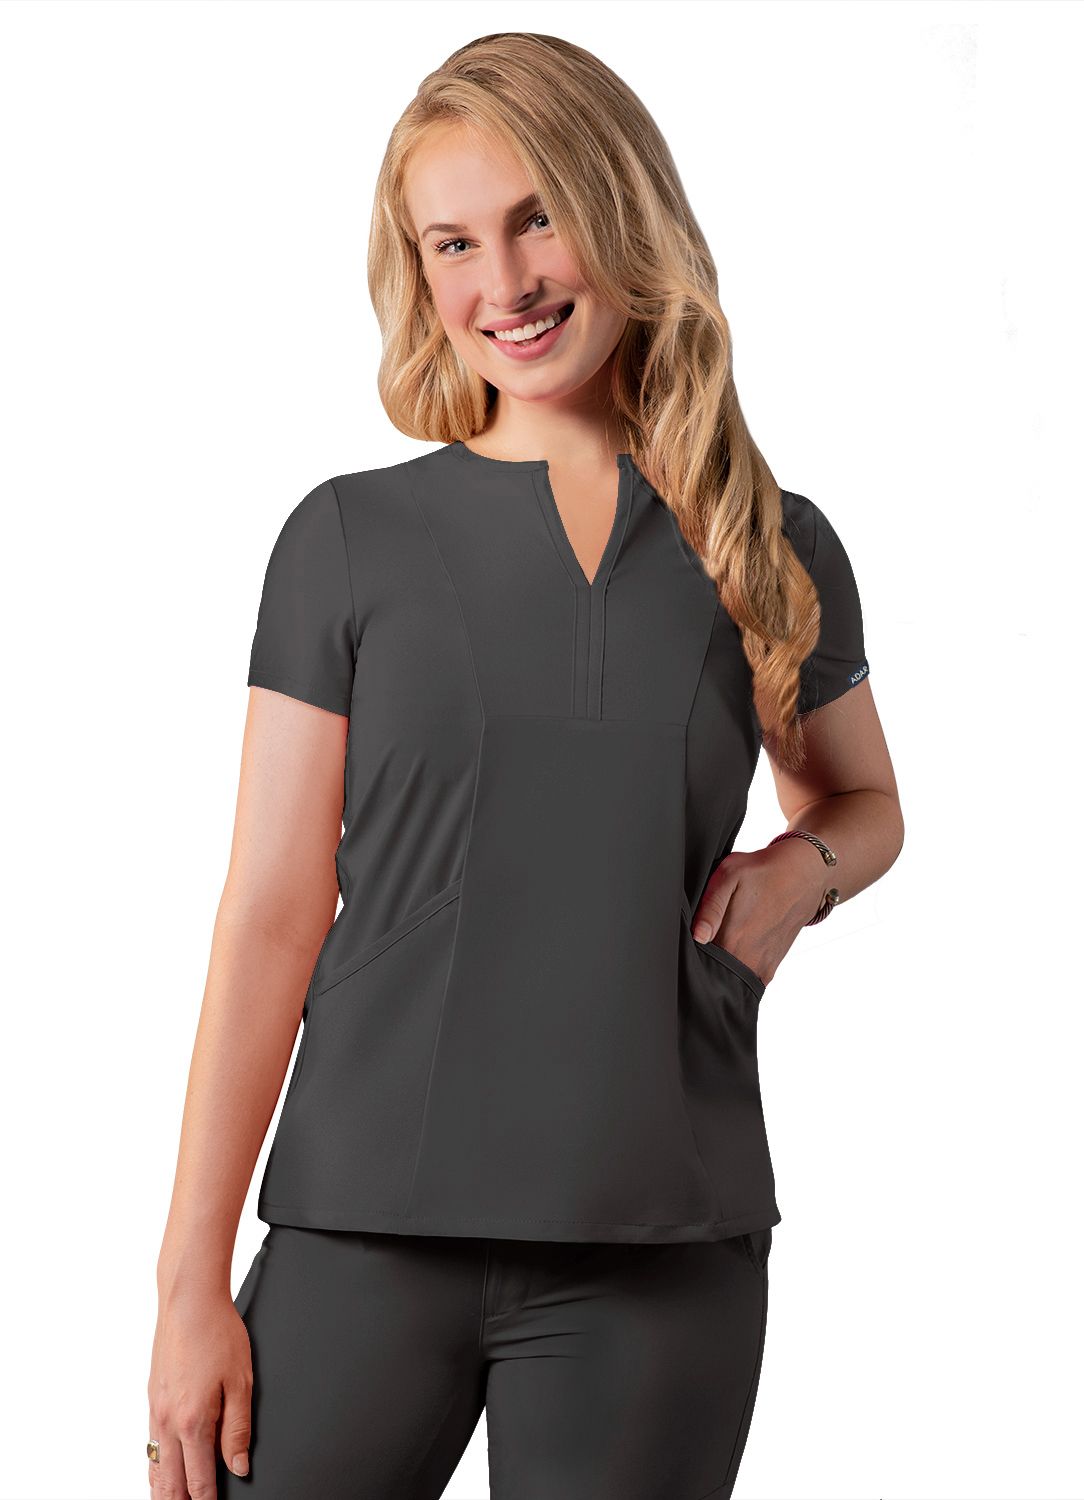 Addition Women's Notched V-neck Top by Adar XXS-3XL / PEWTER